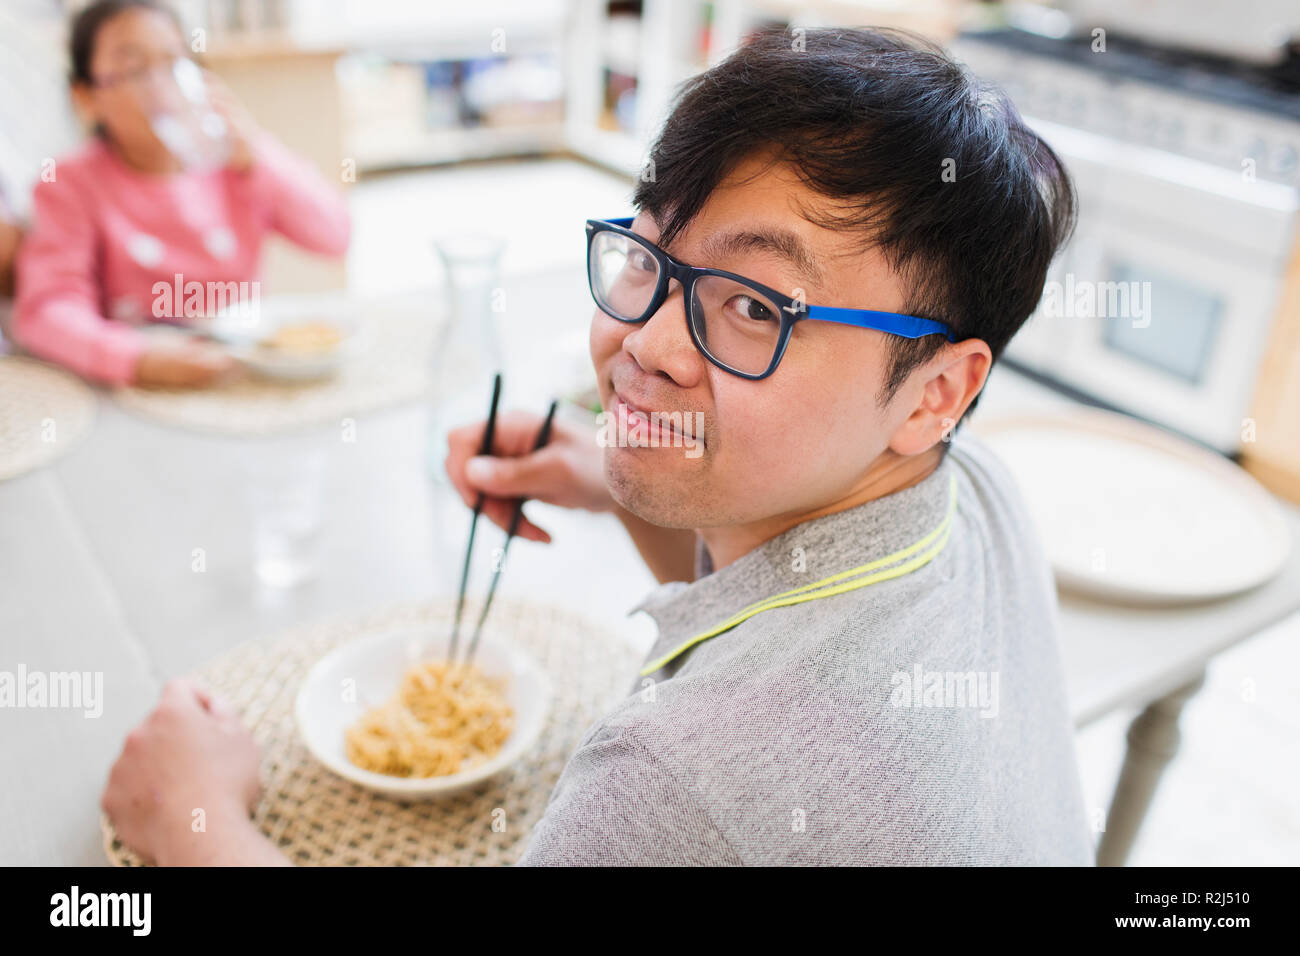 Portrait smiling man eating noodles with chopsticks at table Stock Photo